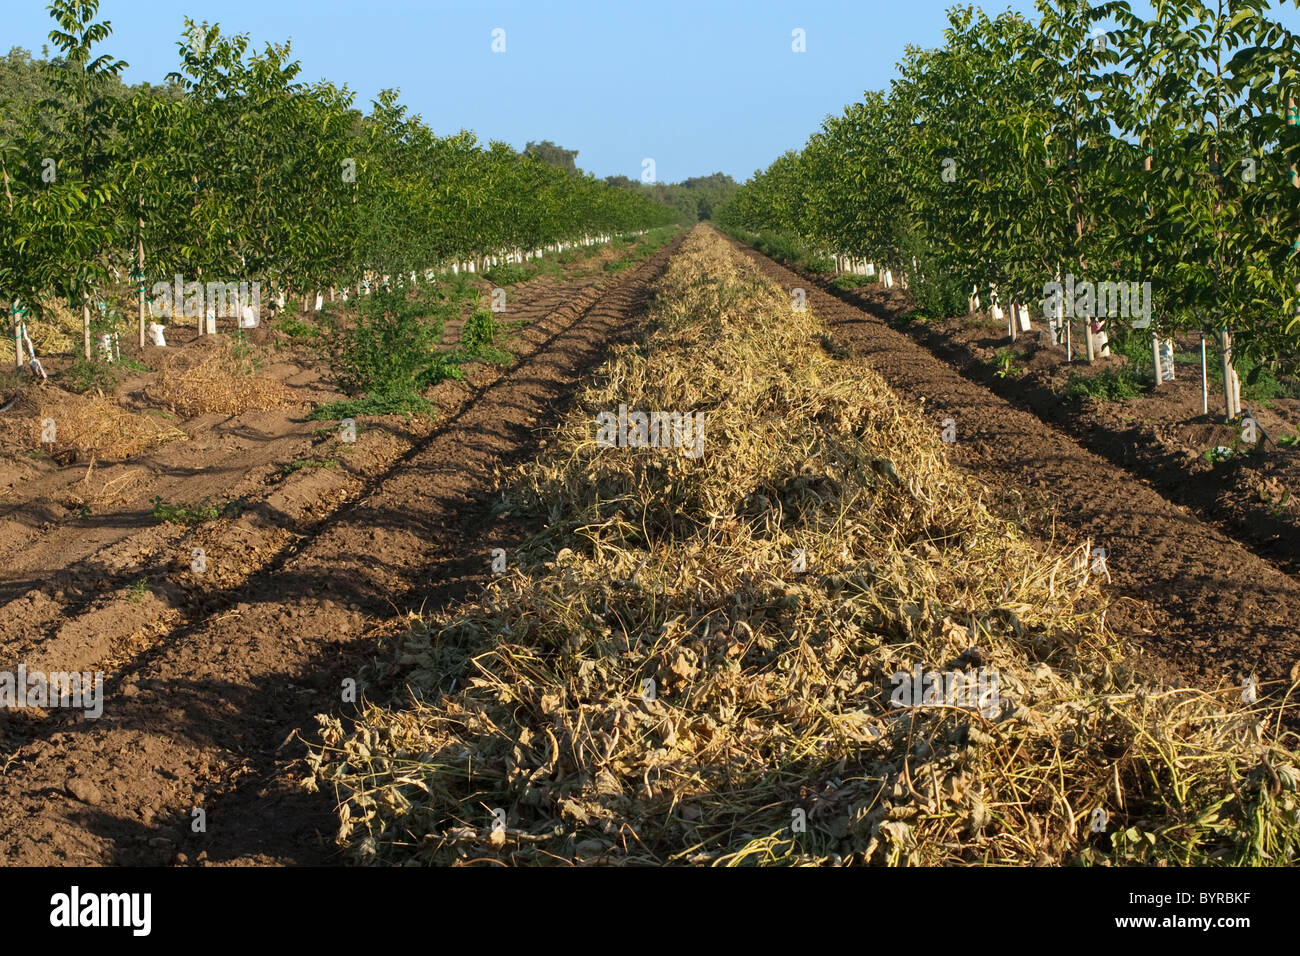 Kidney beans, cut and windrowed for drying before harvest, grown between rows of newly planted walnut trees / California, USA. Stock Photo